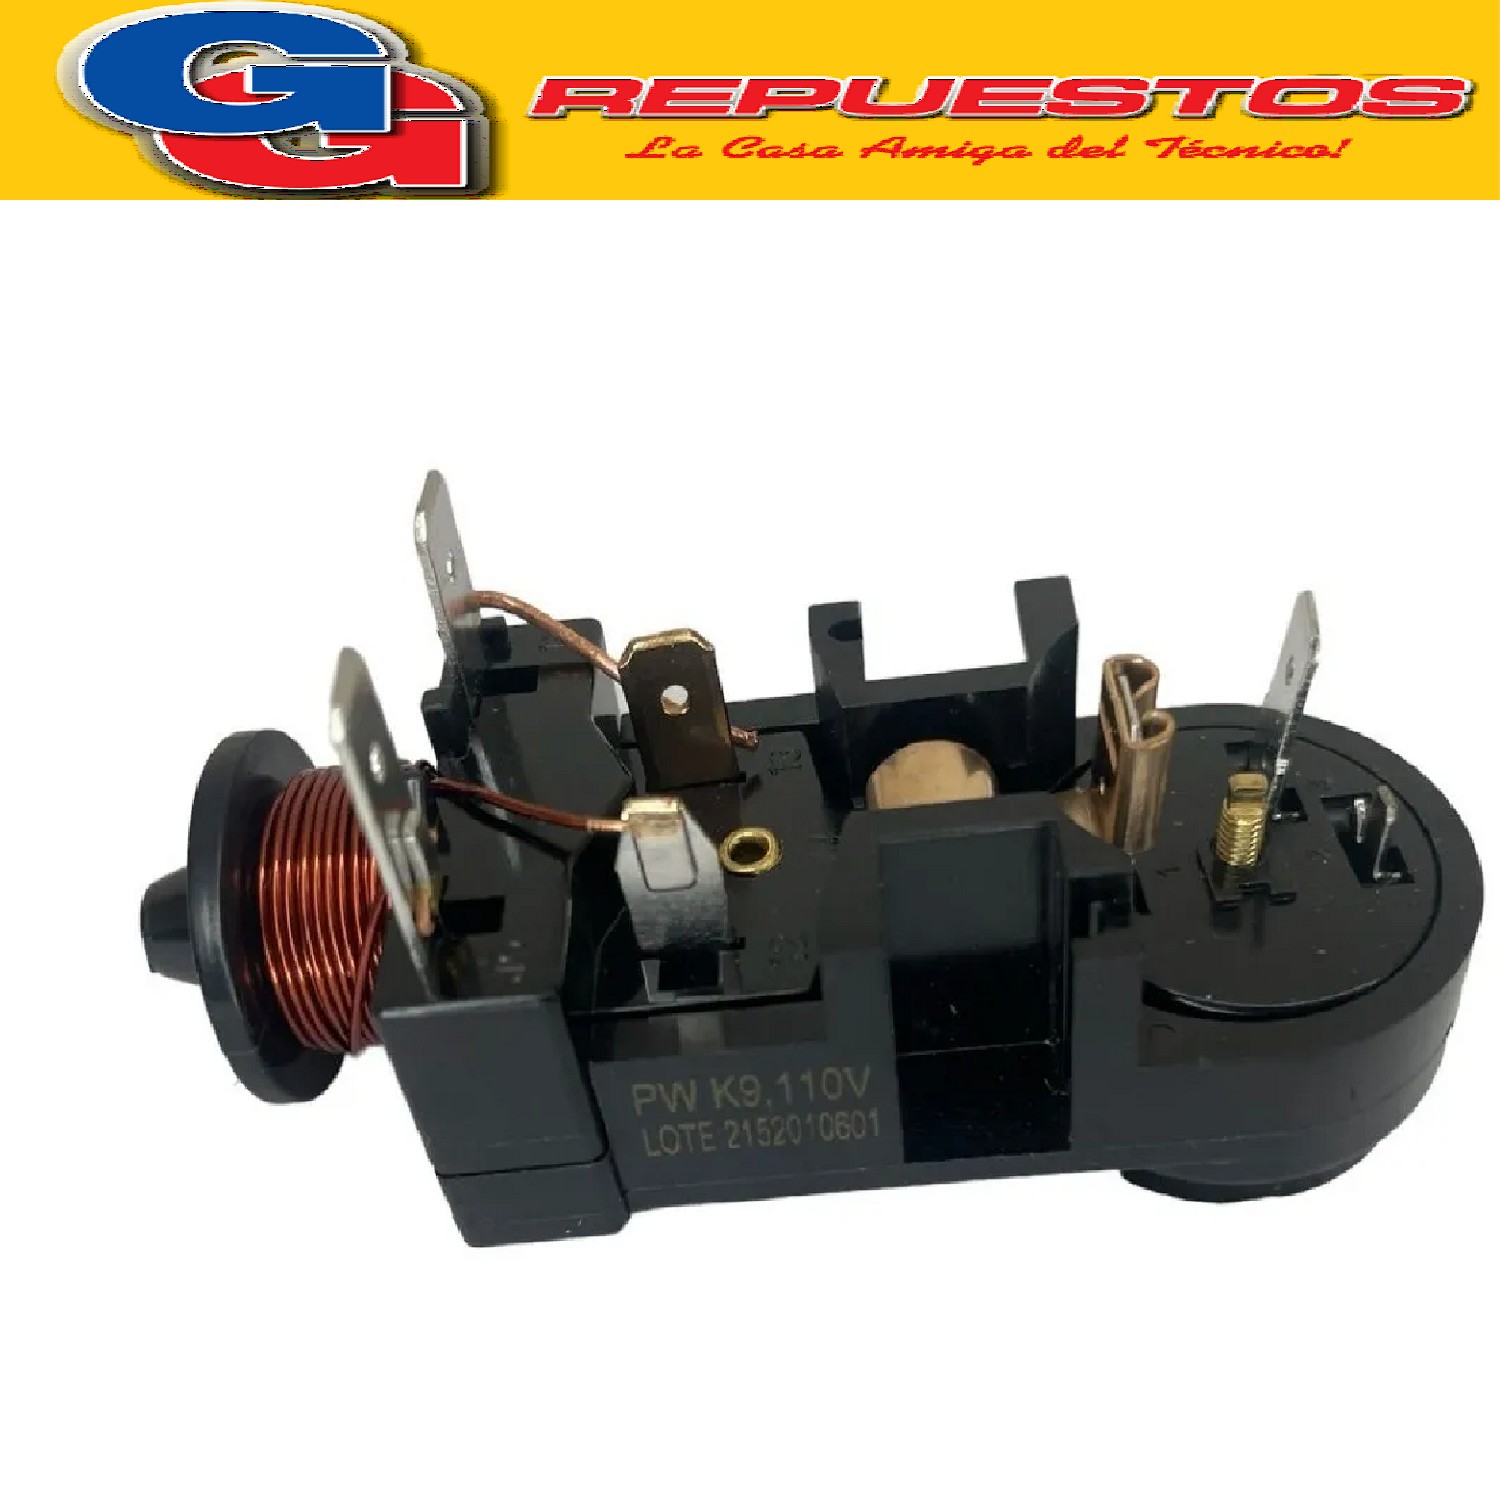 RELAY/PROTECTOR TIP EMBRACO  CON TERMICO 1/5 HP PW 3.5 A 1.3 50.045 FF 7.5 BK 